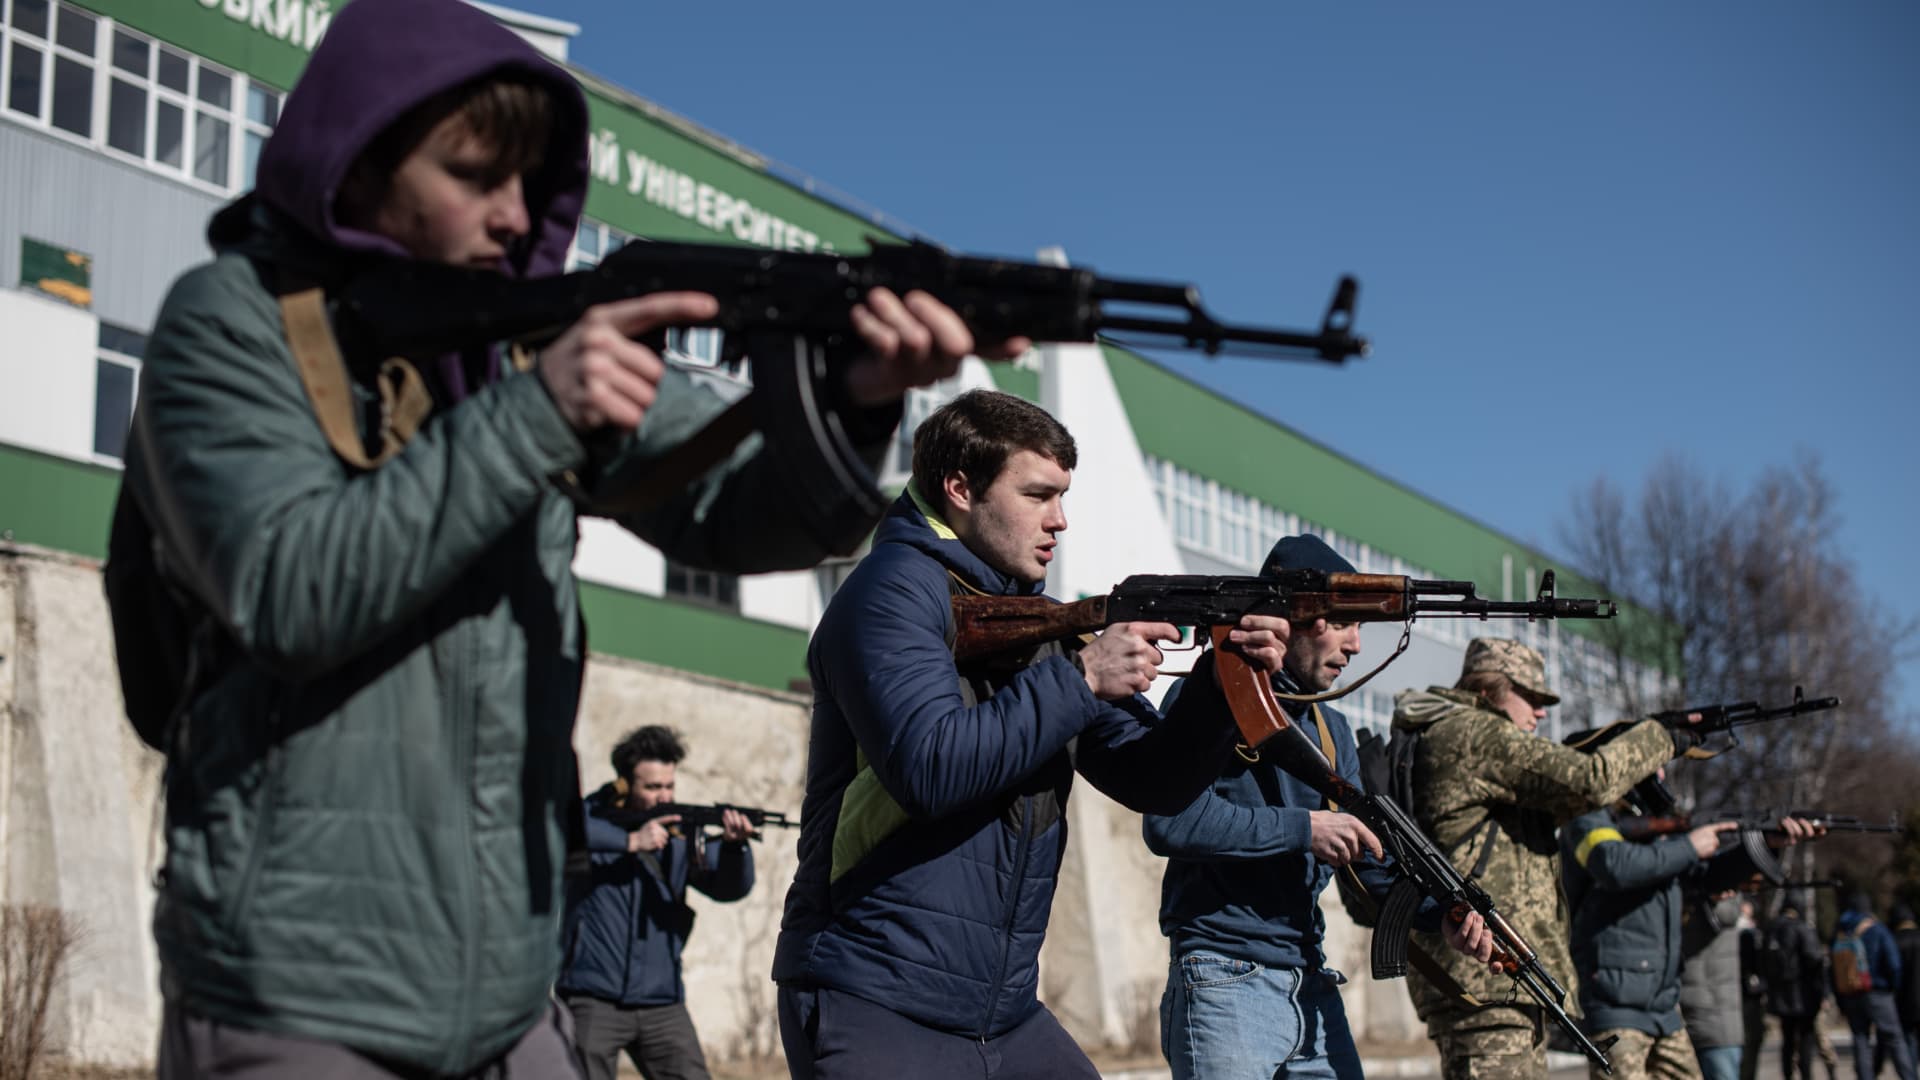 Civilians practice how to handle a firearm at a military training exercise conducted by the Prosvita society in Ivano-Frankivsk, Ukraine, on March 11, 2022.